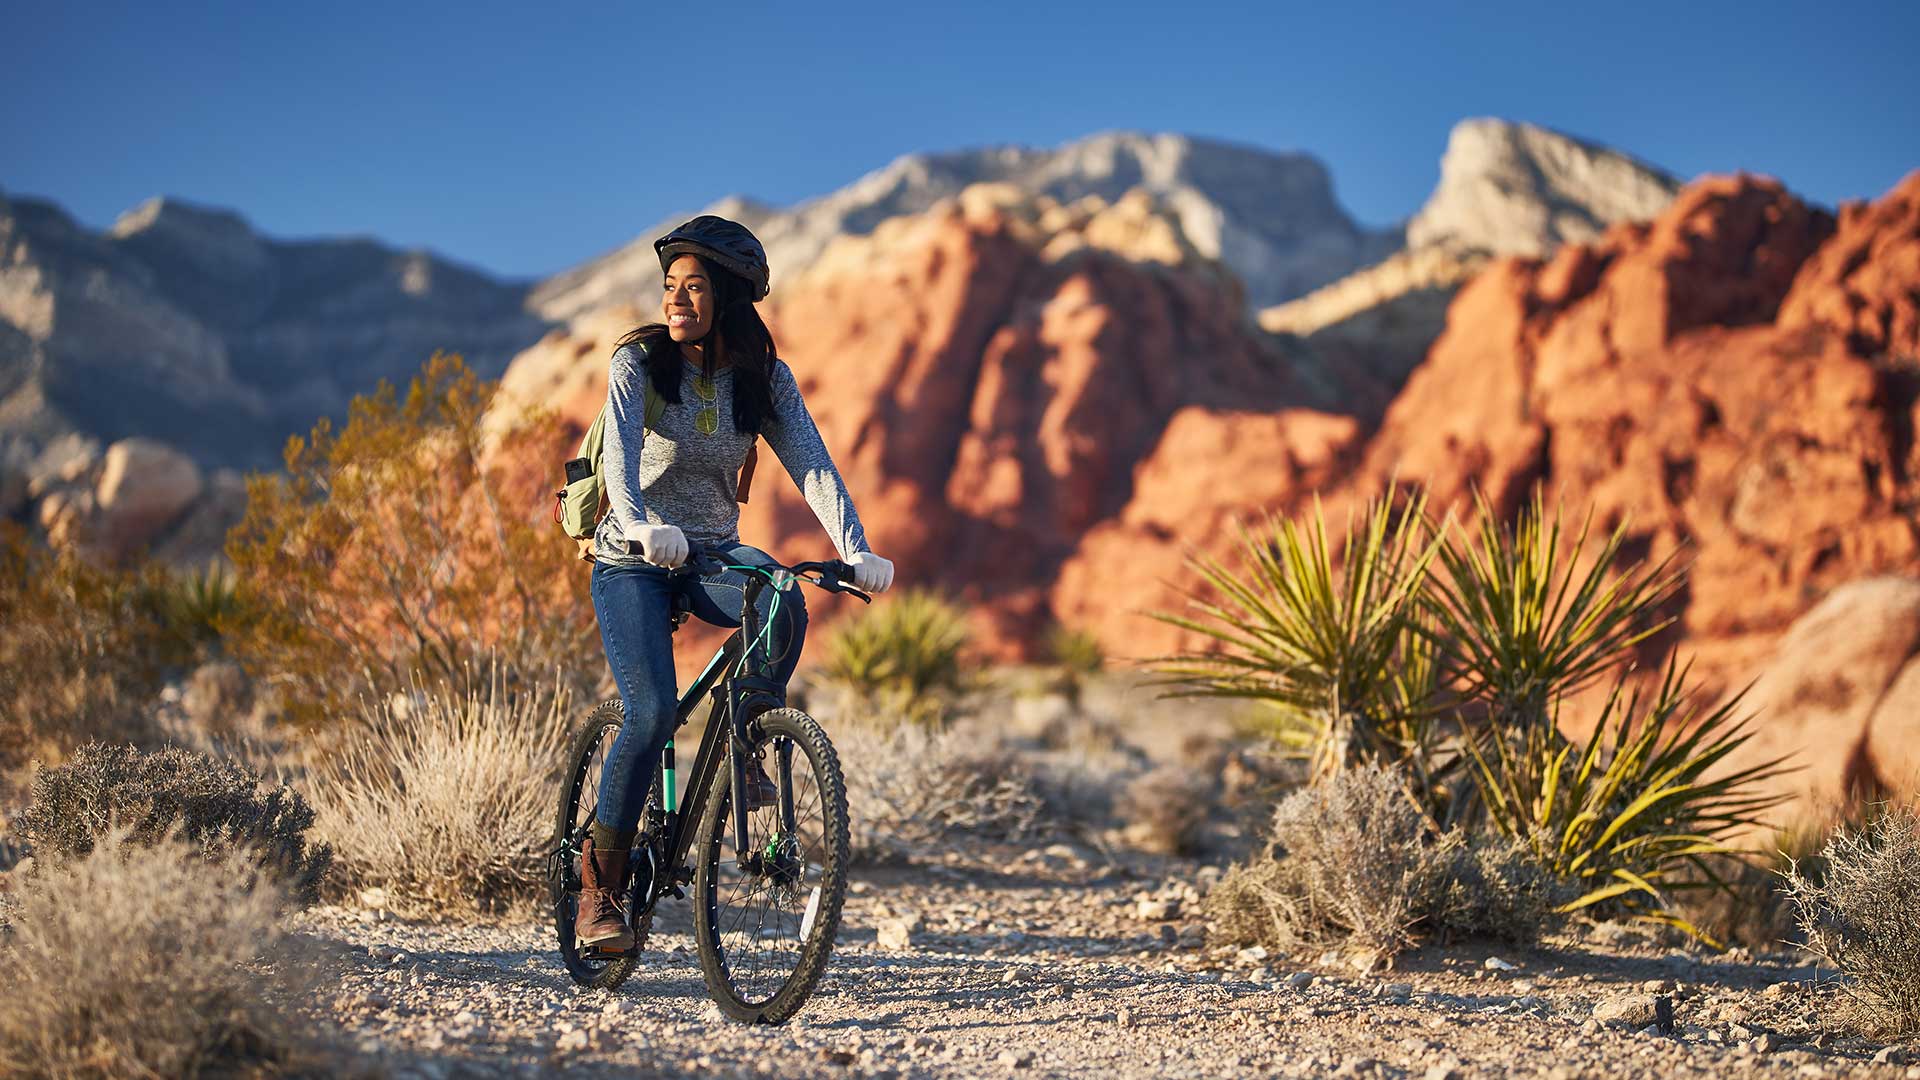 A woman cycling on a desert trail with red rock formations in the background, wearing a hat and backpack, during the daytime.